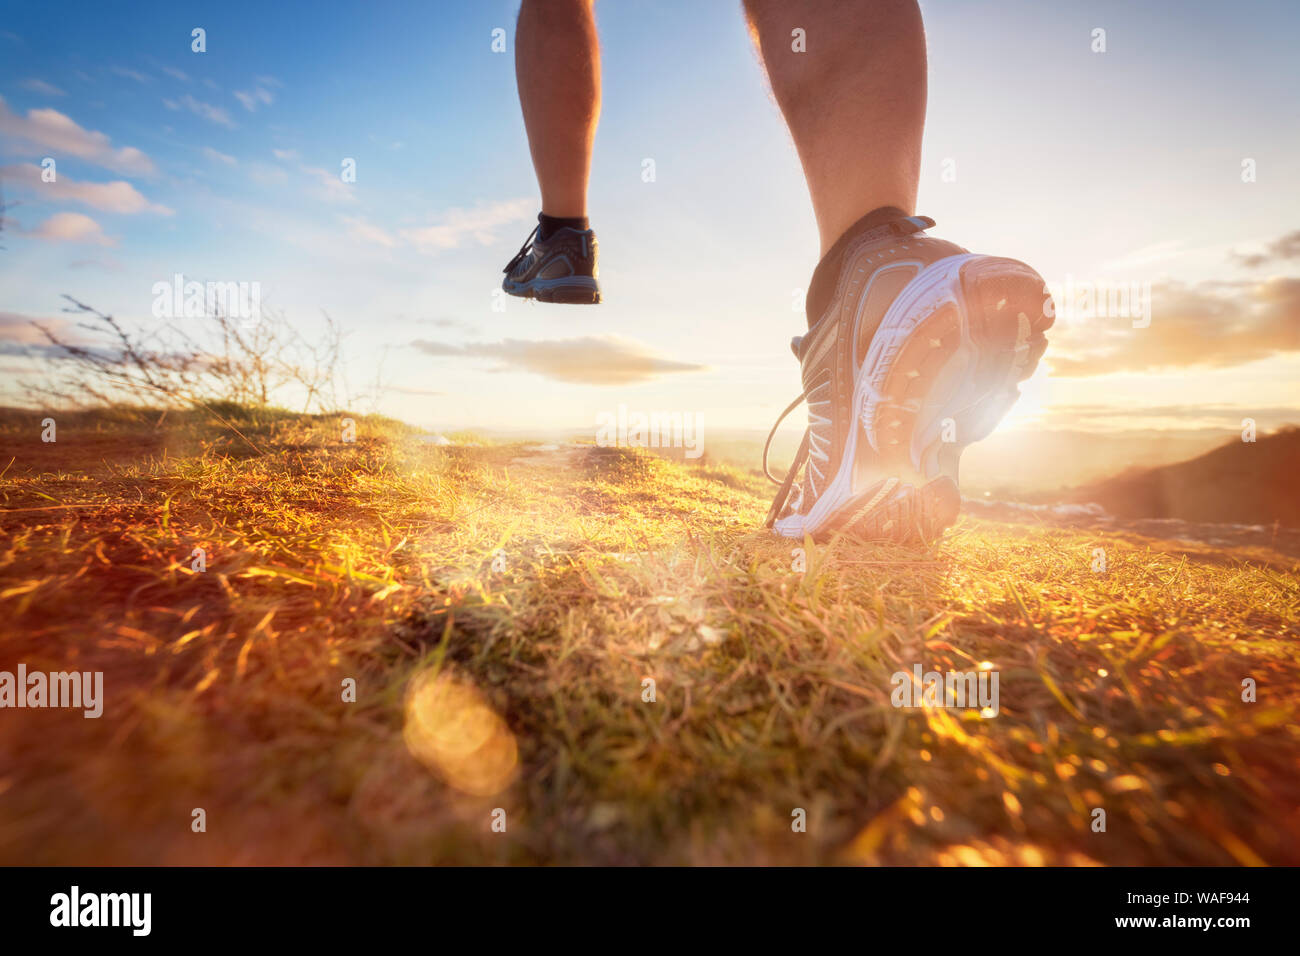 Outdoor cross-country running in morning sunrise concept for exercising, fitness and healthy lifestyle Stock Photo